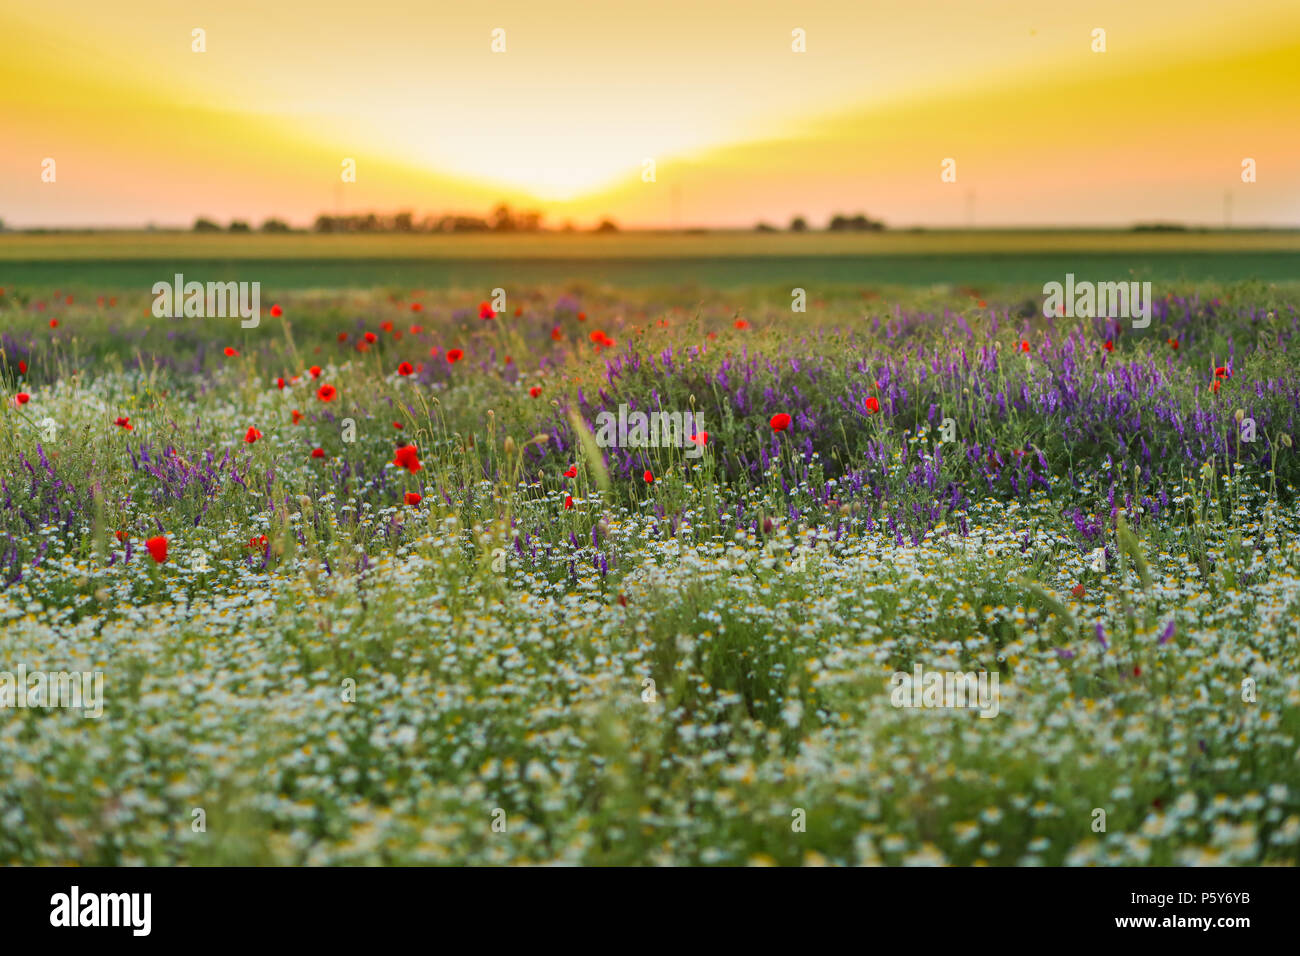 Spectacular sunset over a field of poppies and chamomile Stock Photo